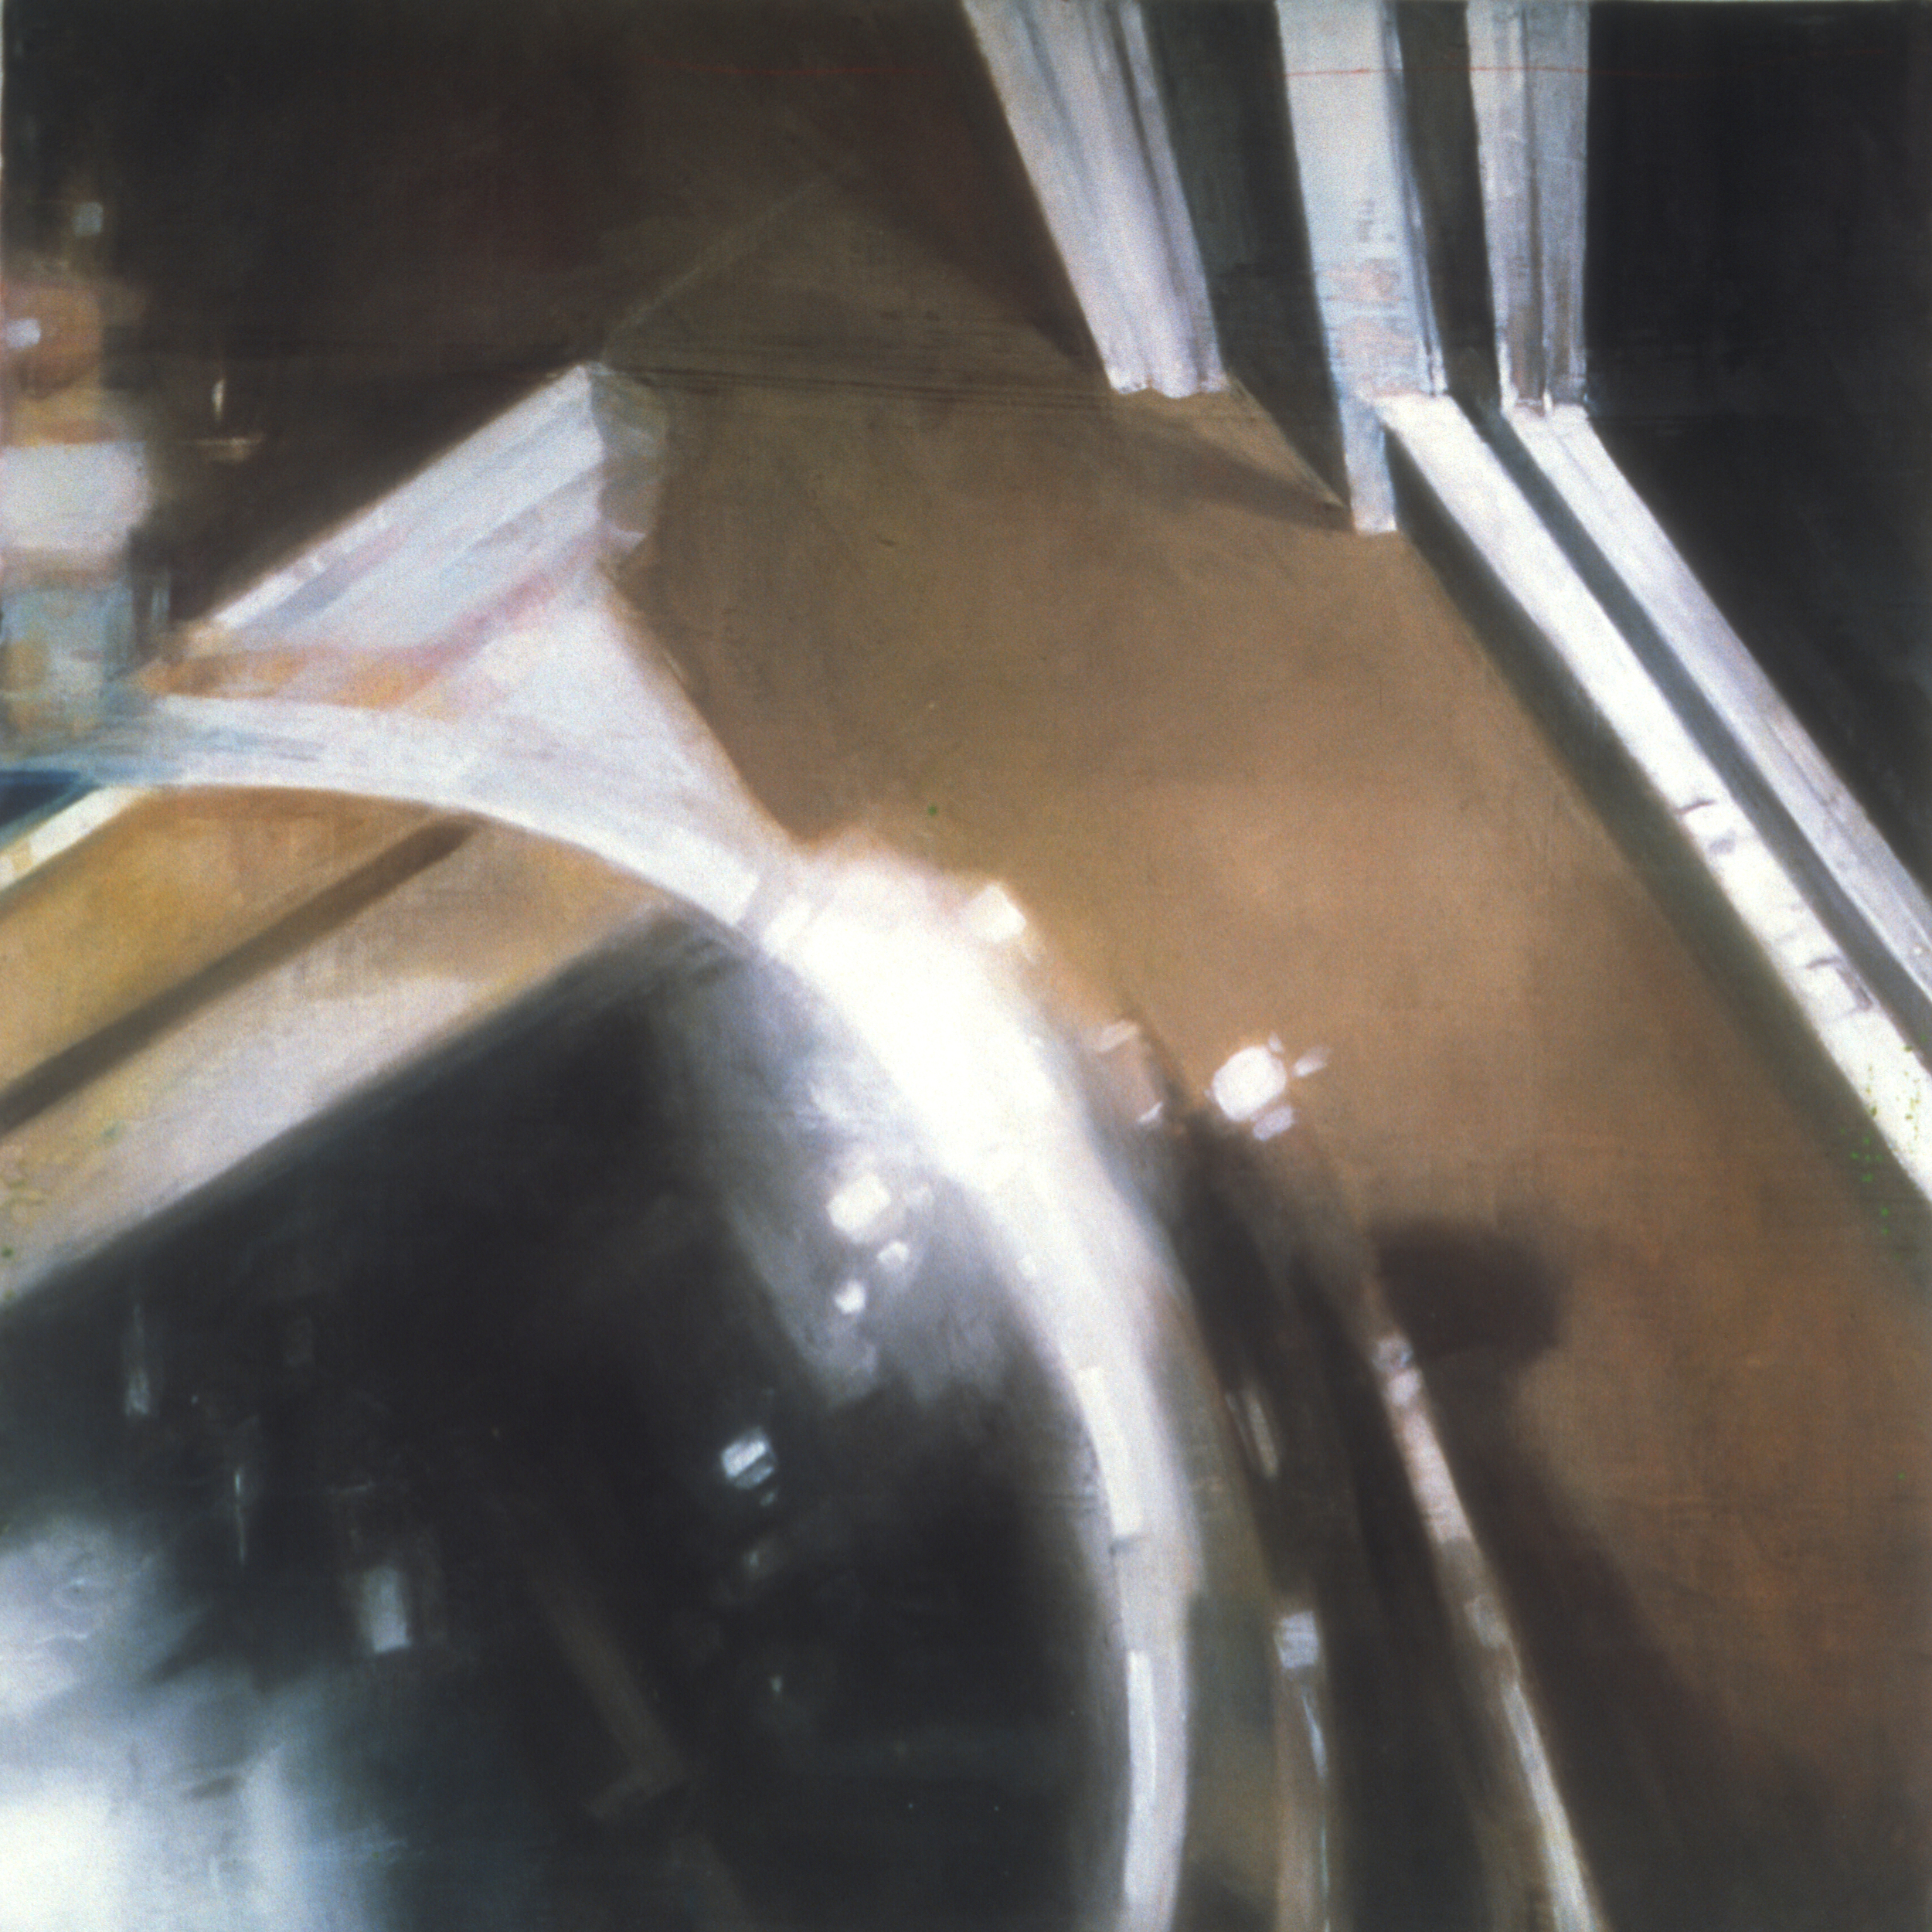   Untitled (Forgetting), &nbsp;1998 Encaustic on panel 12" sq.   private collection, Memphis, TN  